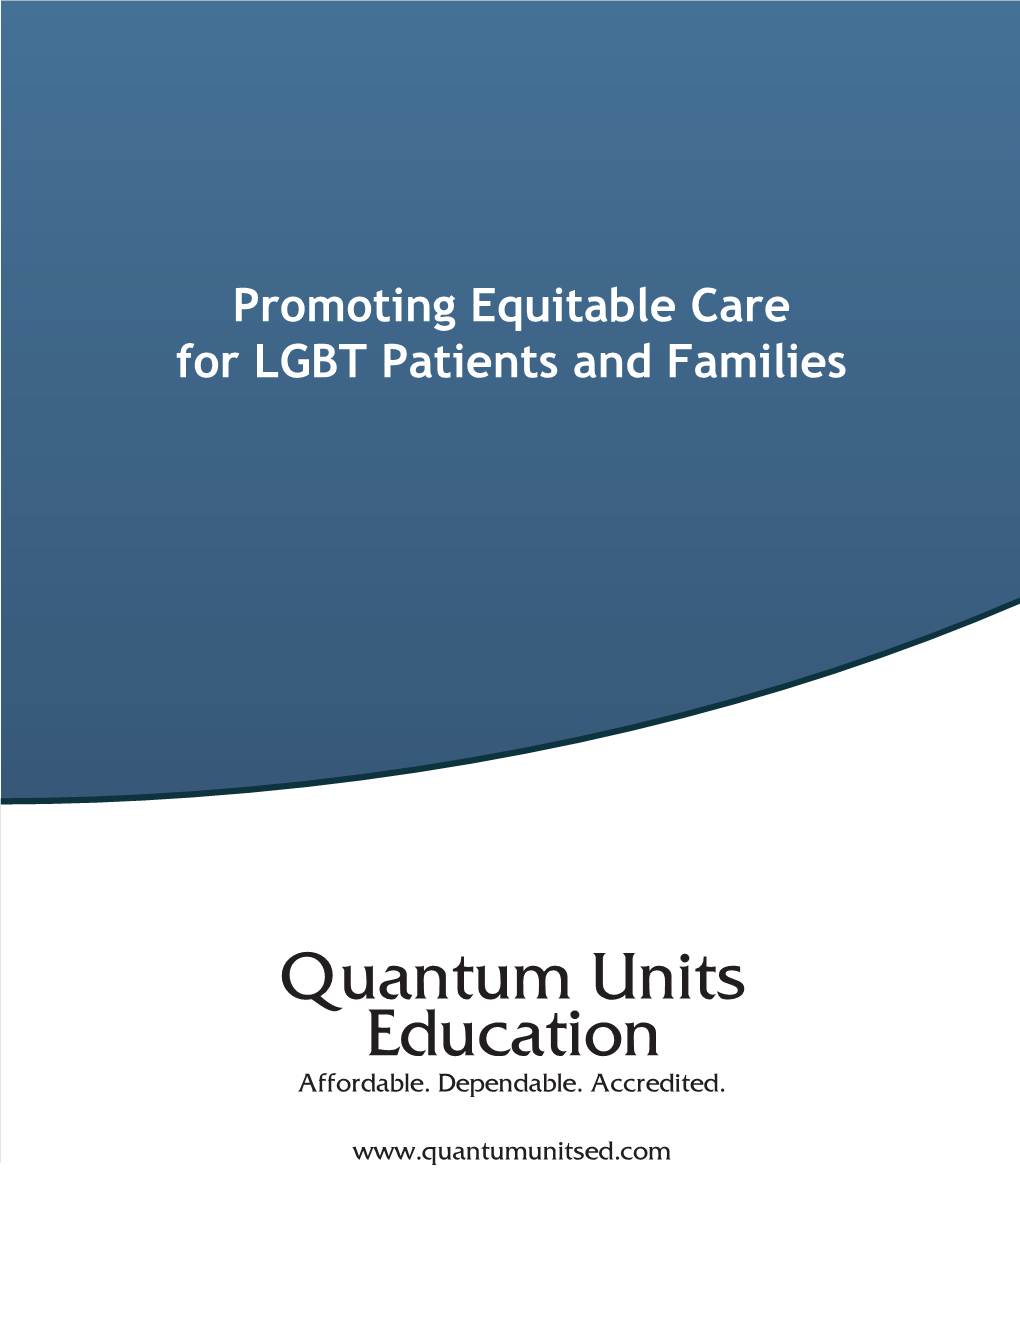 Promoting Equitable Care for LGBT Patients and Families